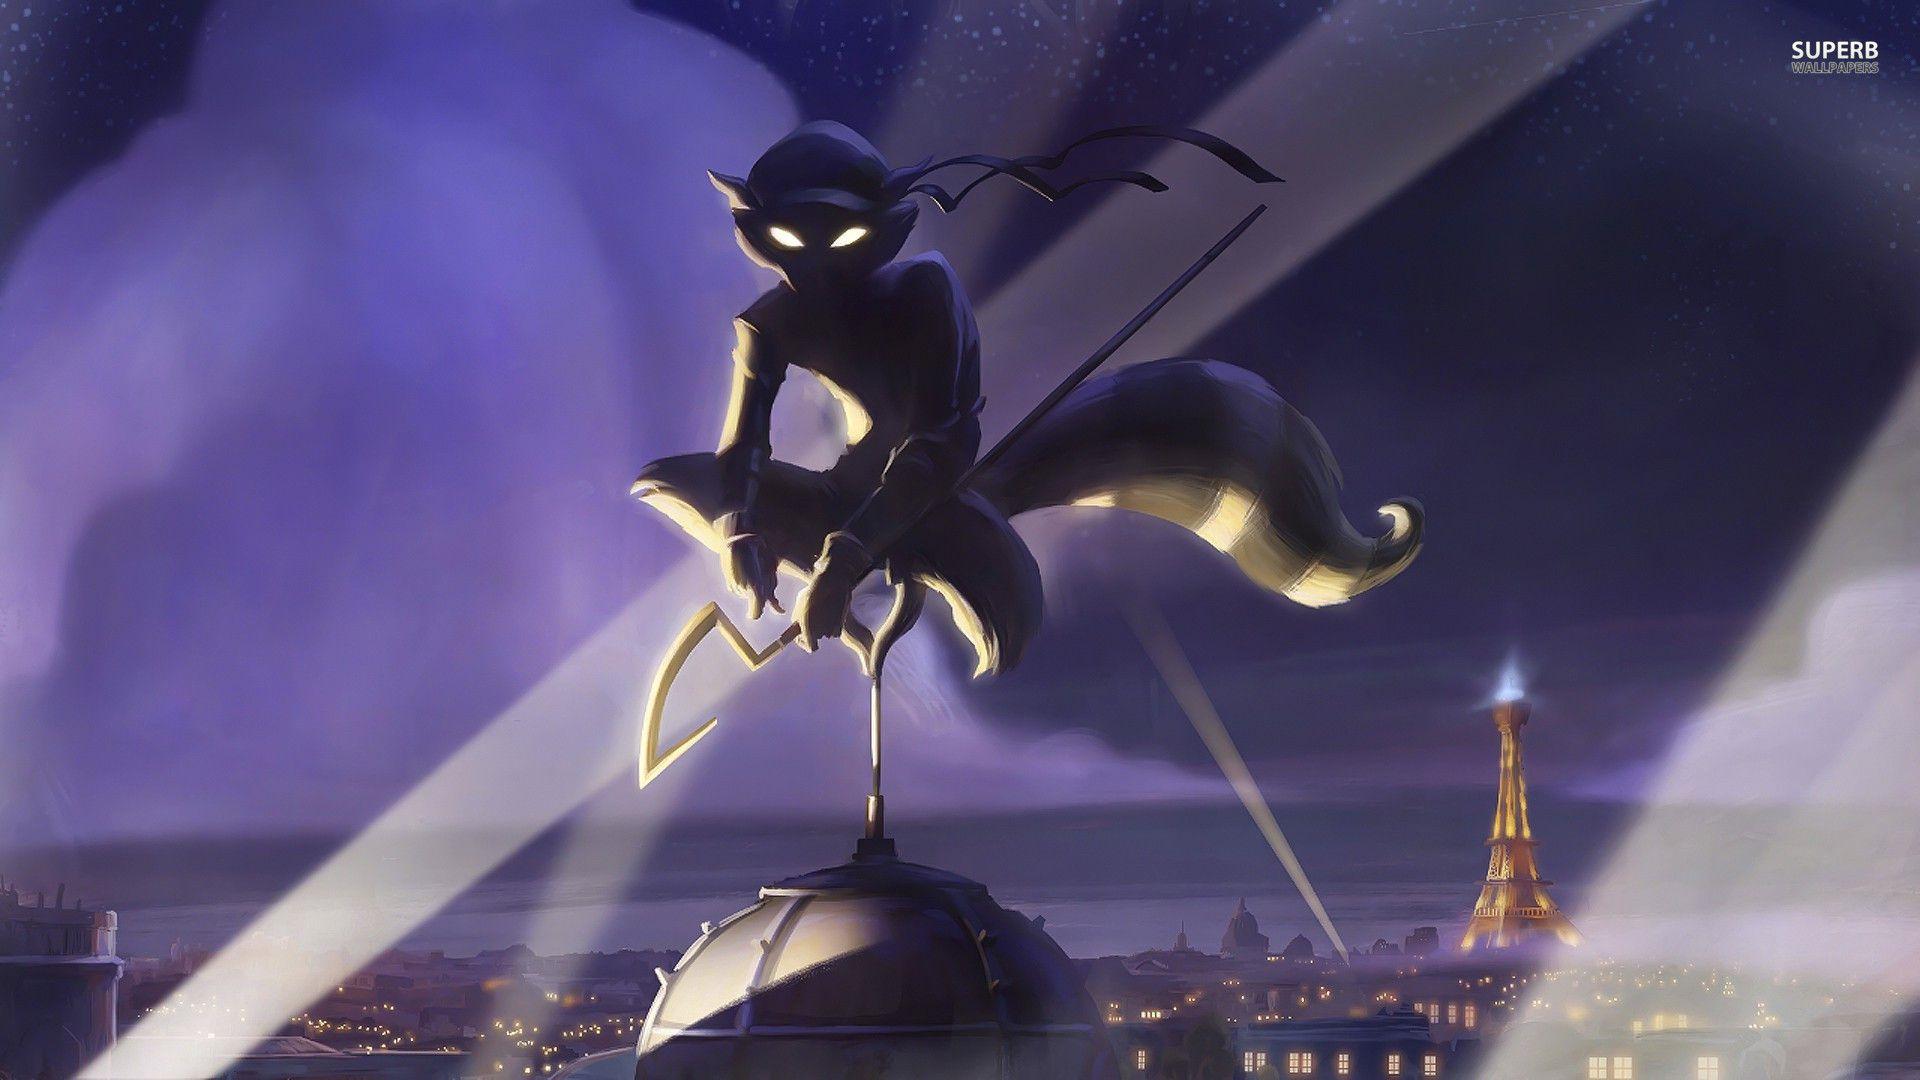 Sly Cooper 5: New Reveal Means Bad News